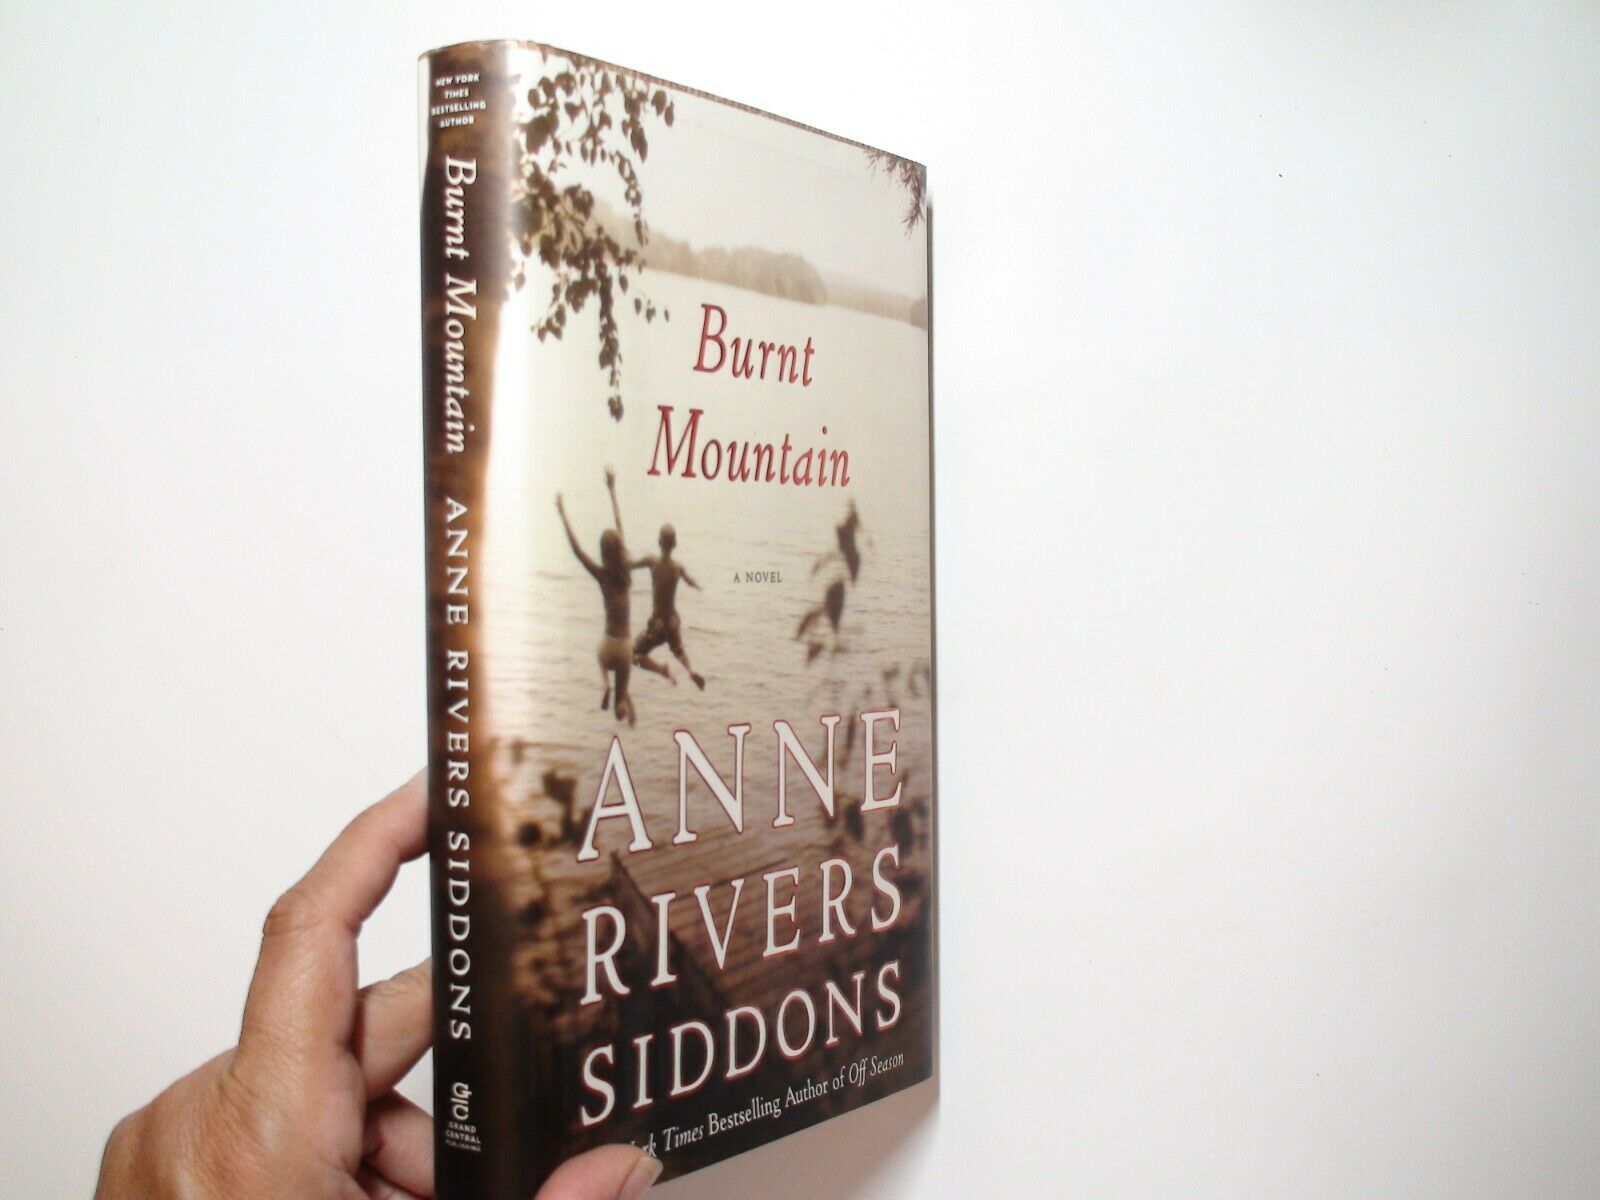 Burnt Mountain by Anne Rivers Siddons, 1st Ed, Hardcover w D/J, 2011